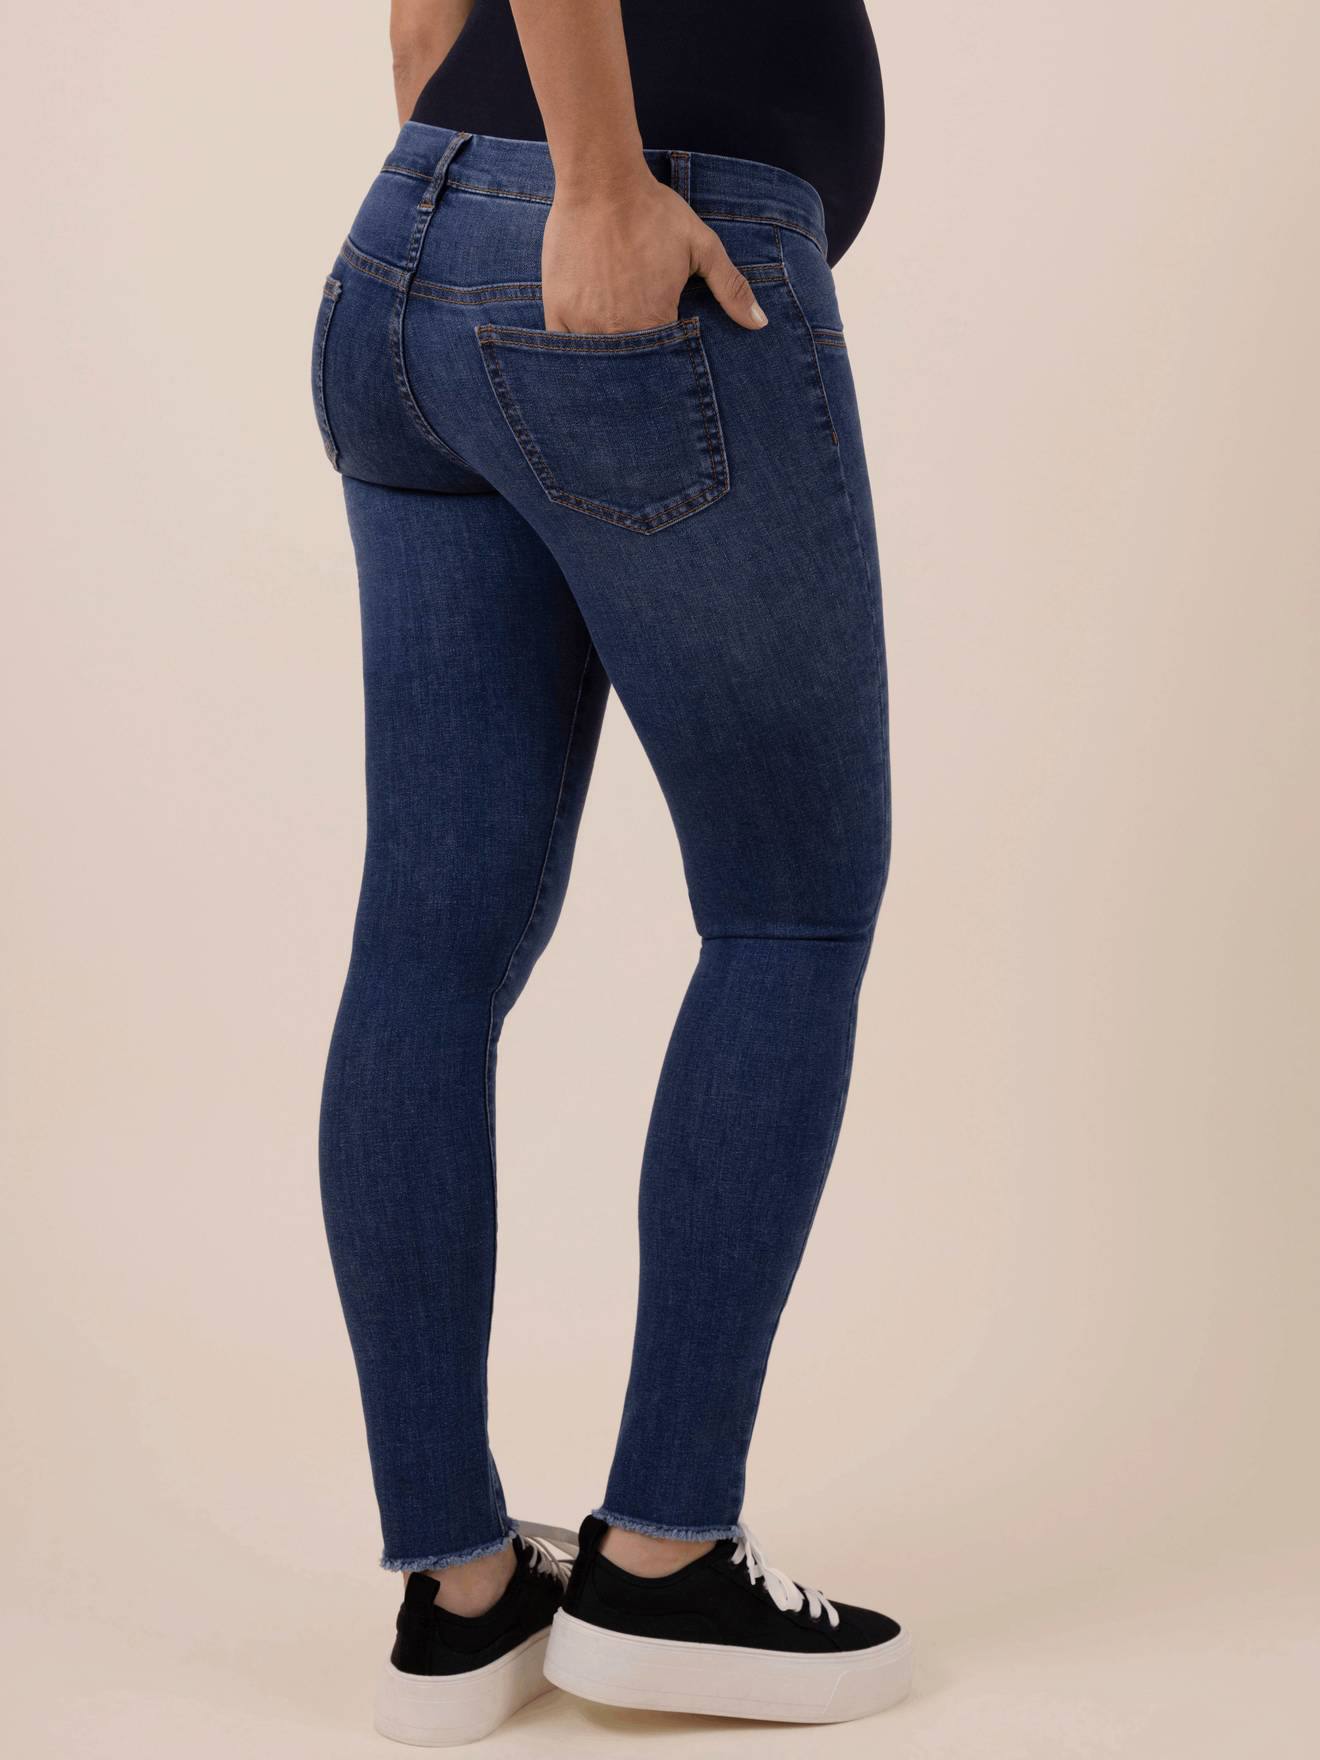 7/8 Length Jeans with Seamless Belly Band for Maternity, Dave Seamless by  ENVIE DE FRAISE - stone, Maternity